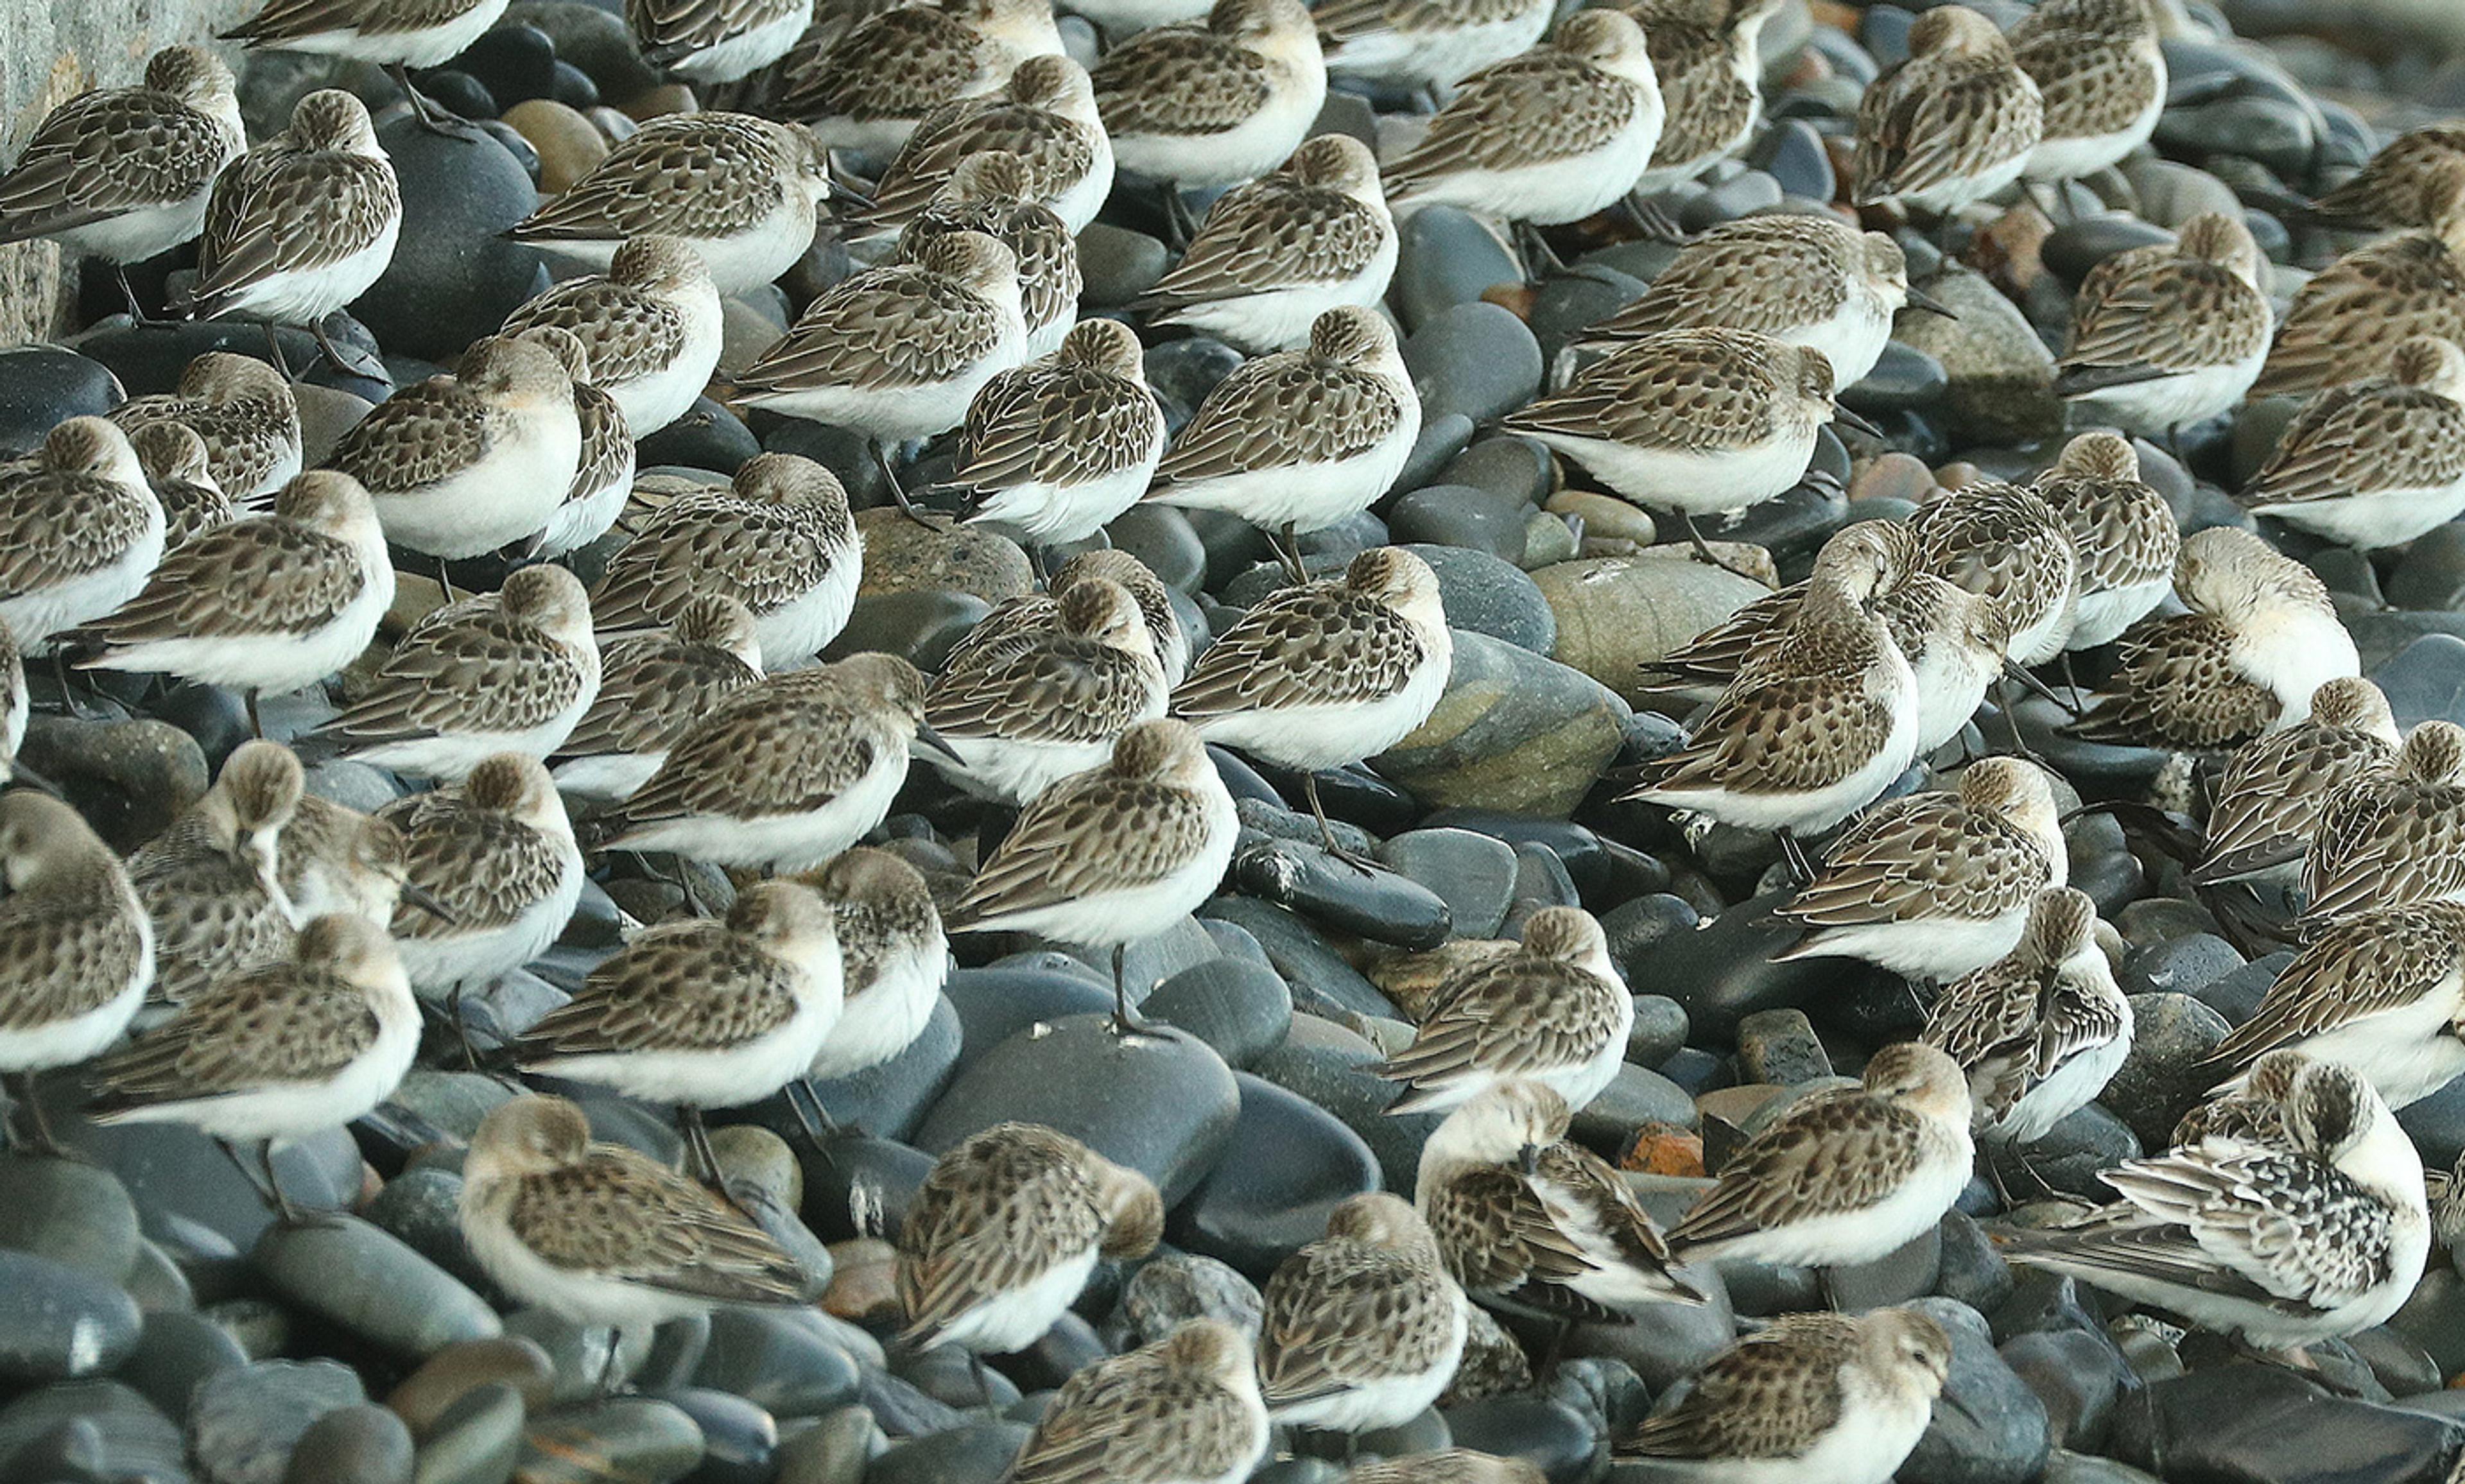 <p>Nature’s wonder: semipalmated sandpipers on the coast of Maine in October 2018. <em>Photo by Alan Schmierer/Flickr</em></p>